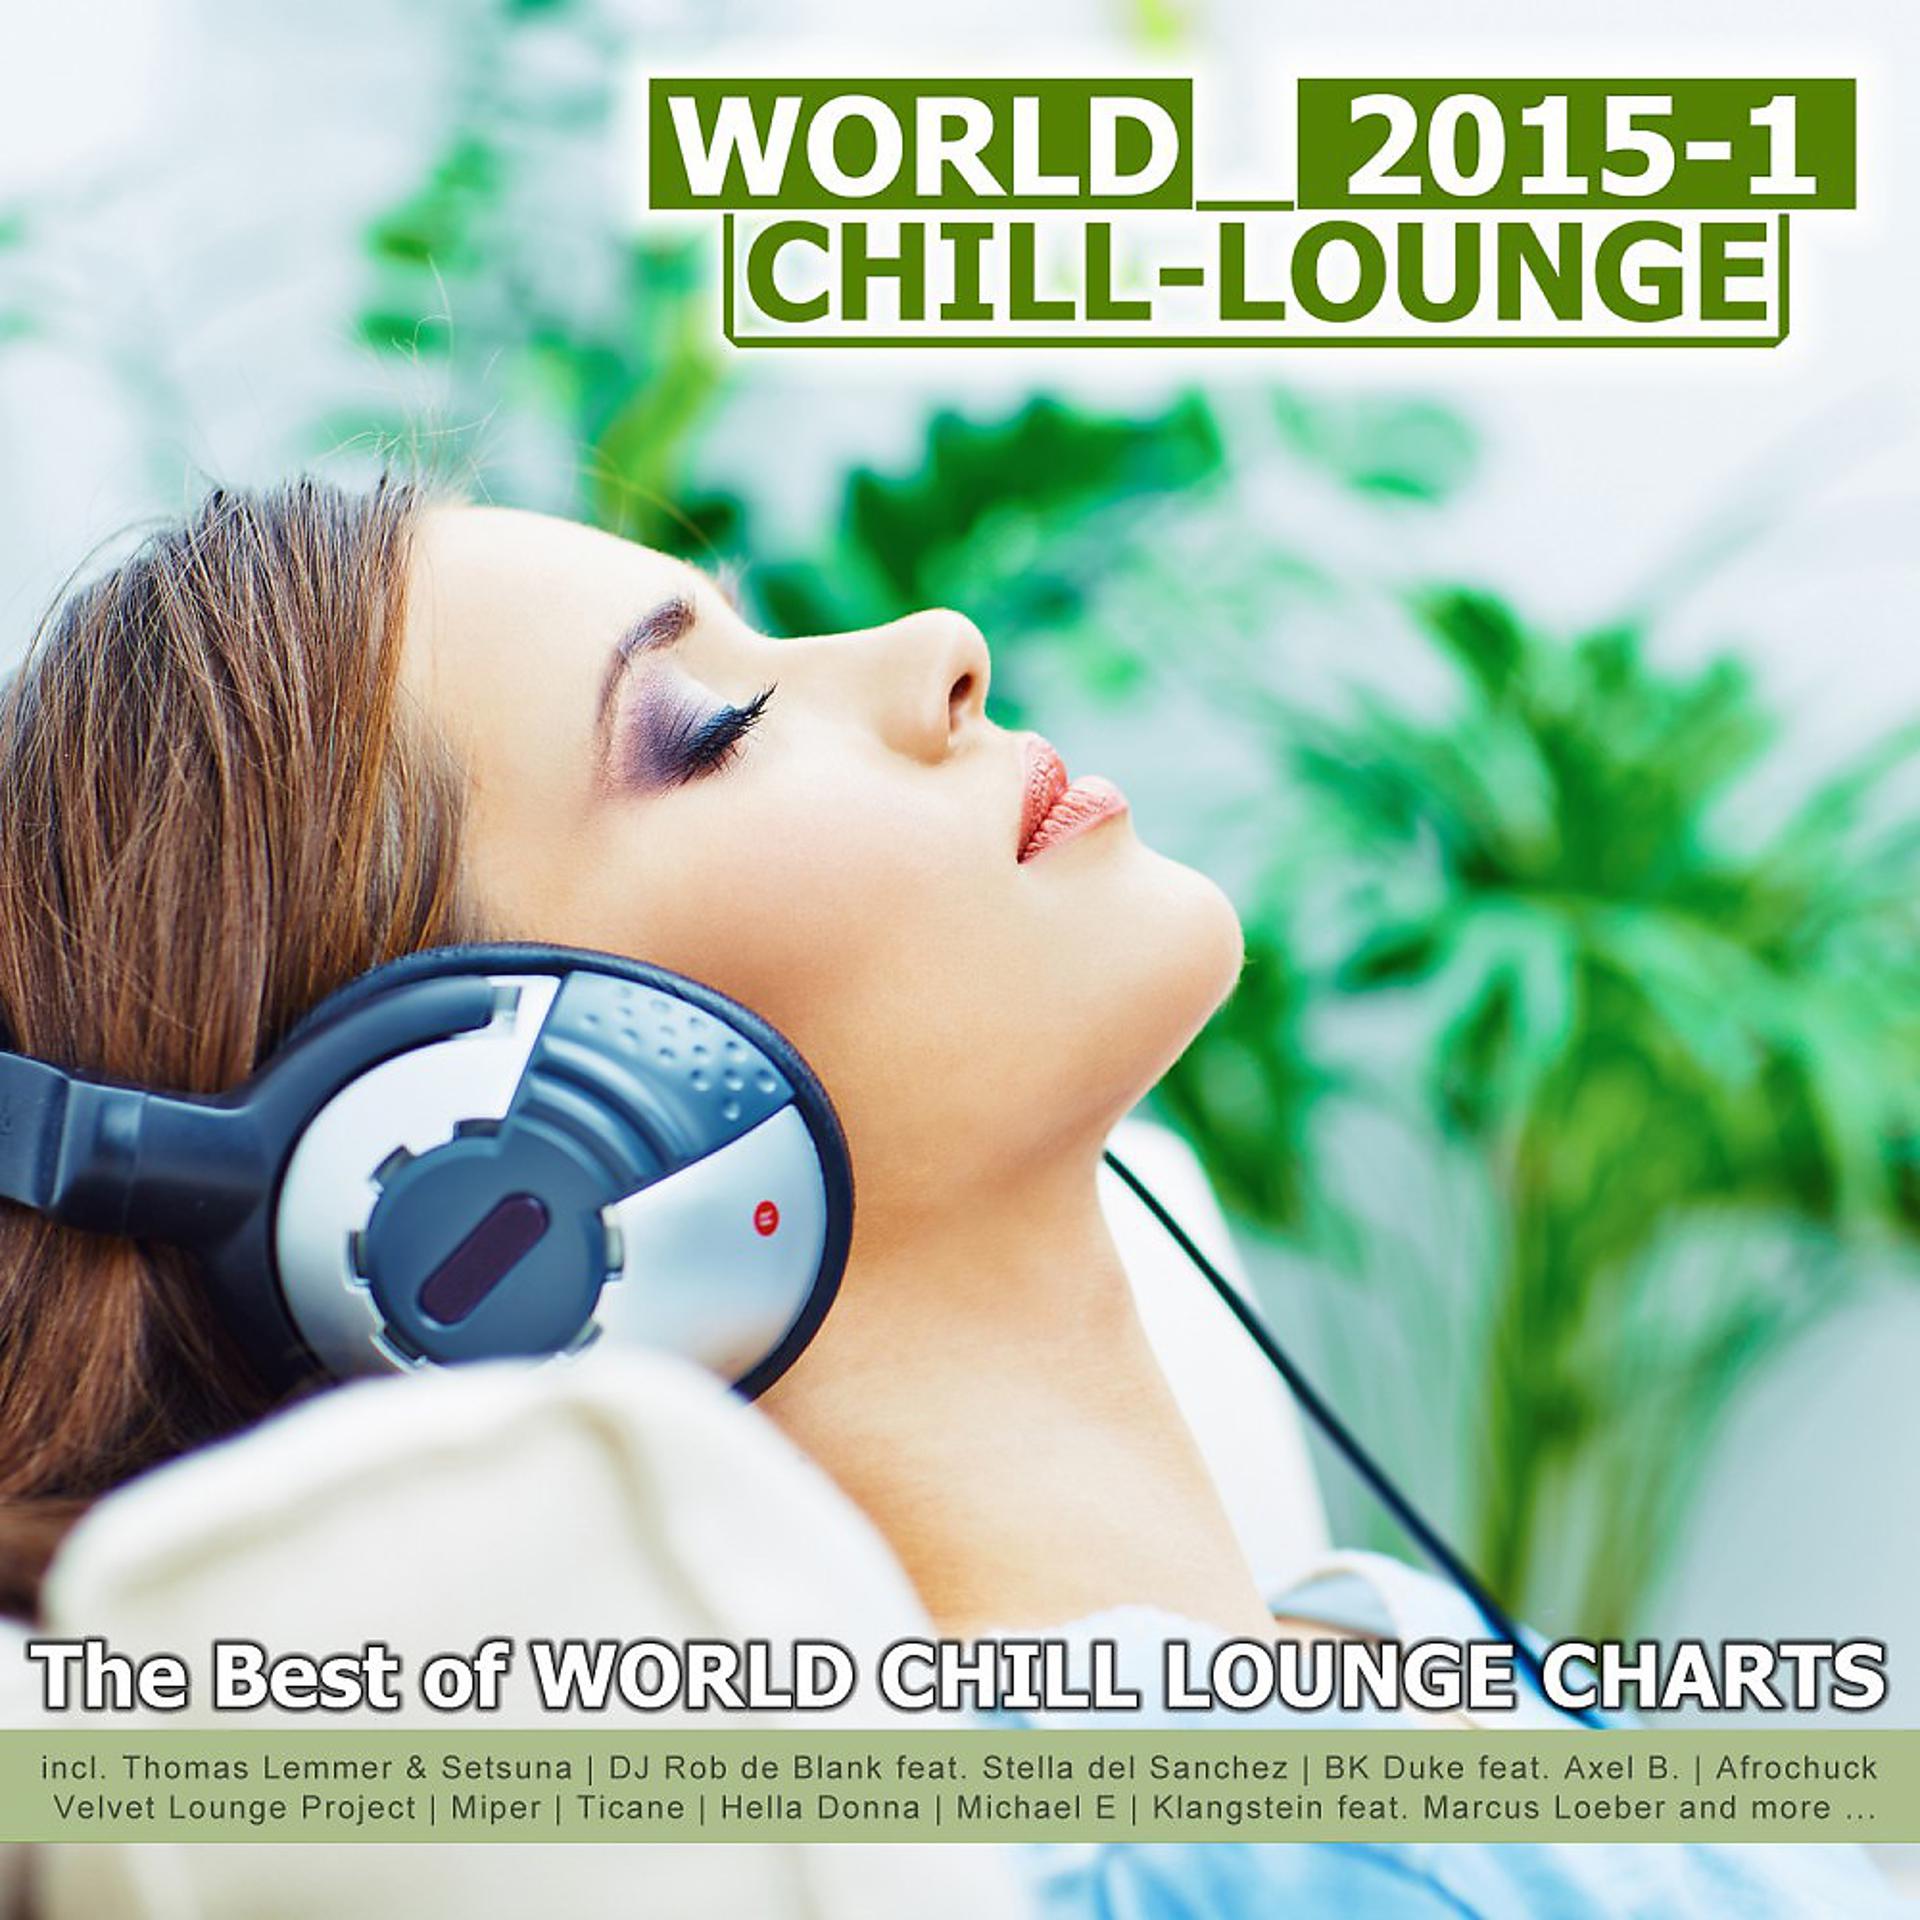 Постер альбома World Chill-Lounge 2015-1 - The Best of World Chill Lounge Charts